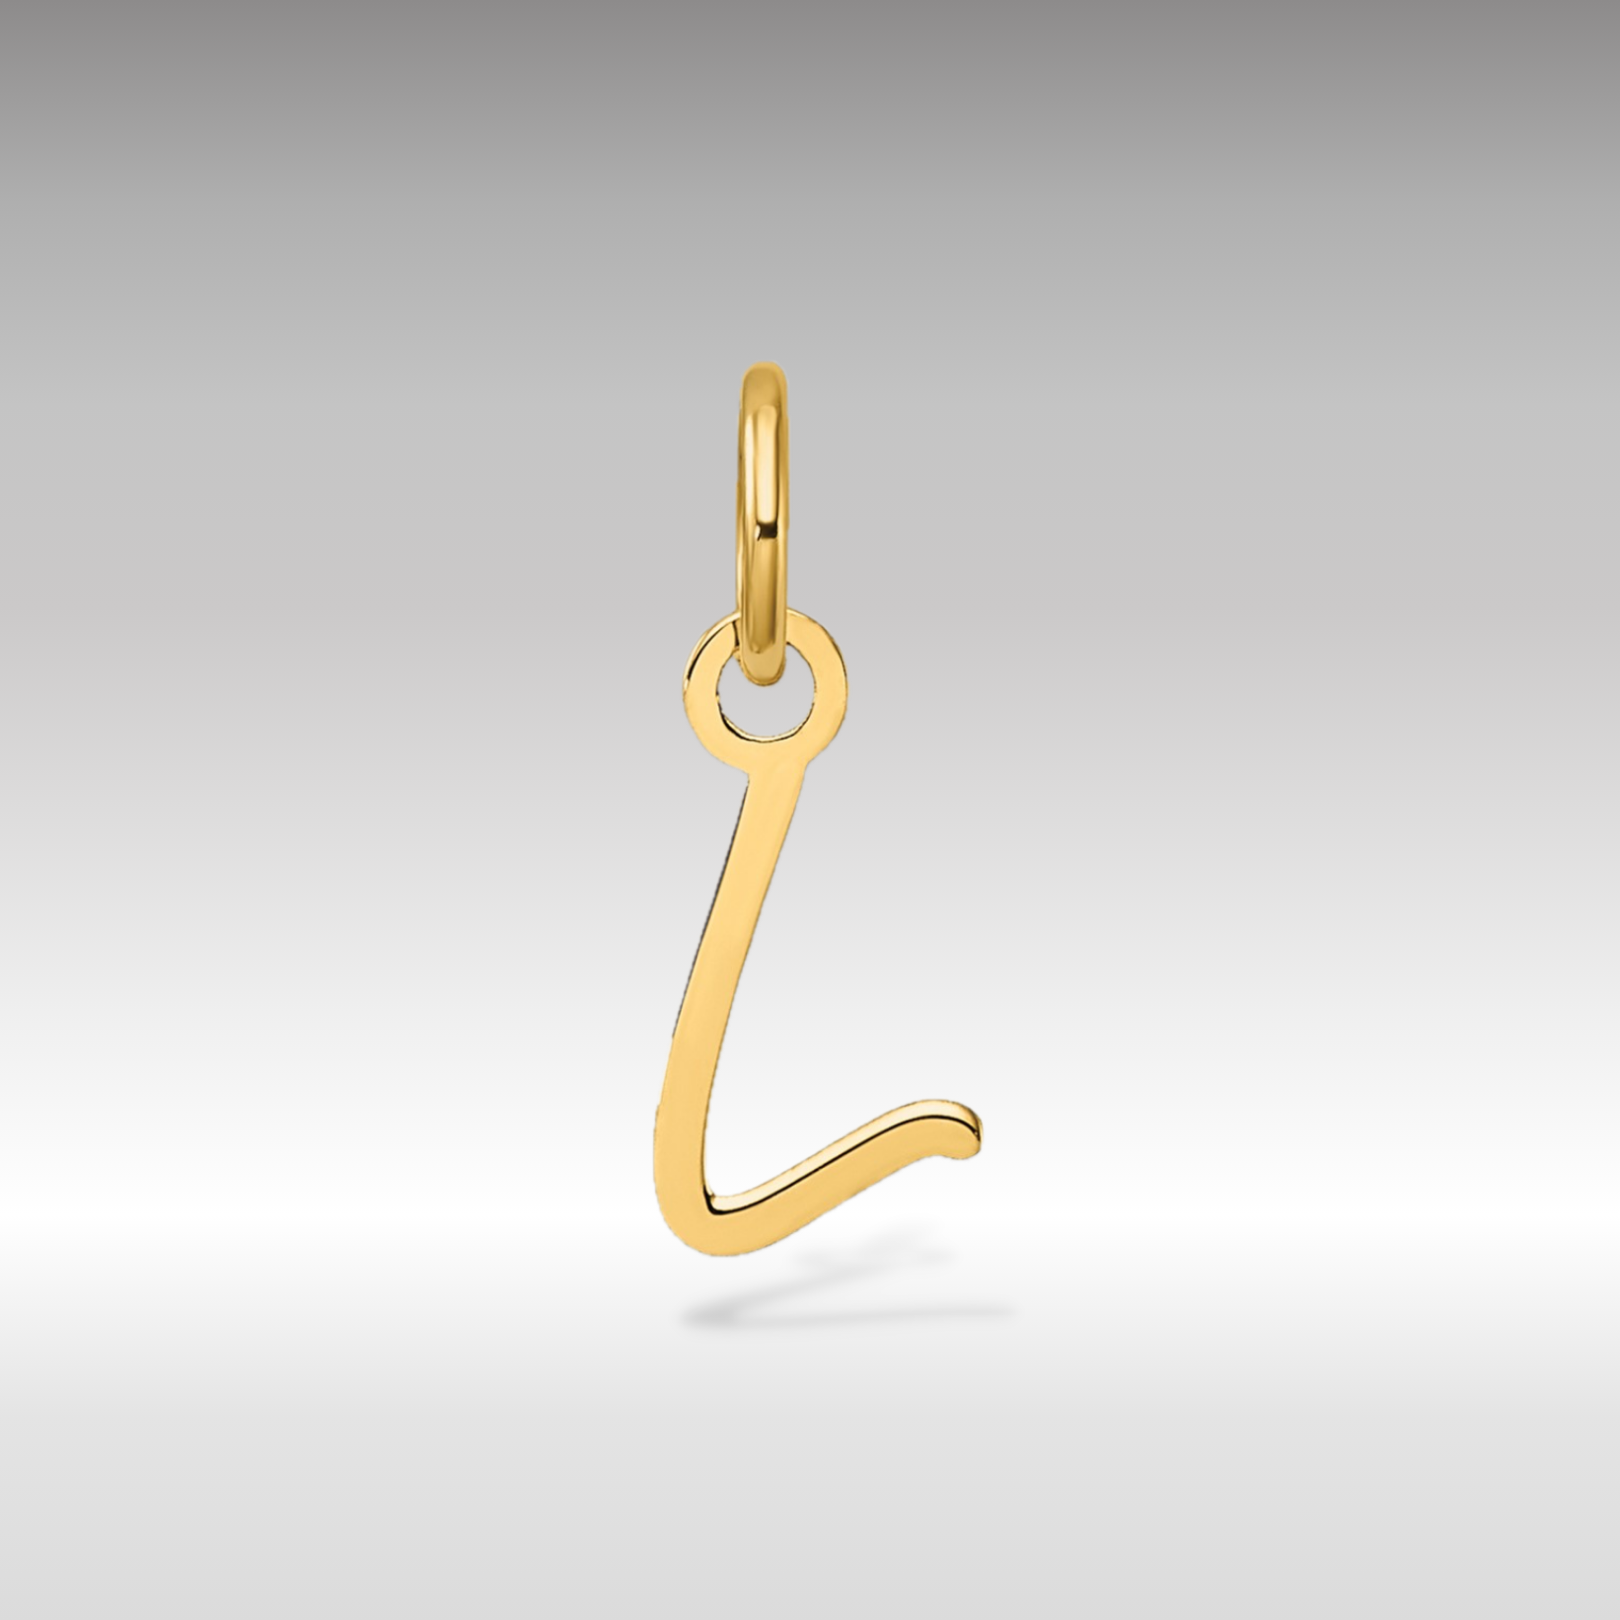 14K Gold Small Script Letter "L" Initial Pendant - Charlie & Co. Jewelry